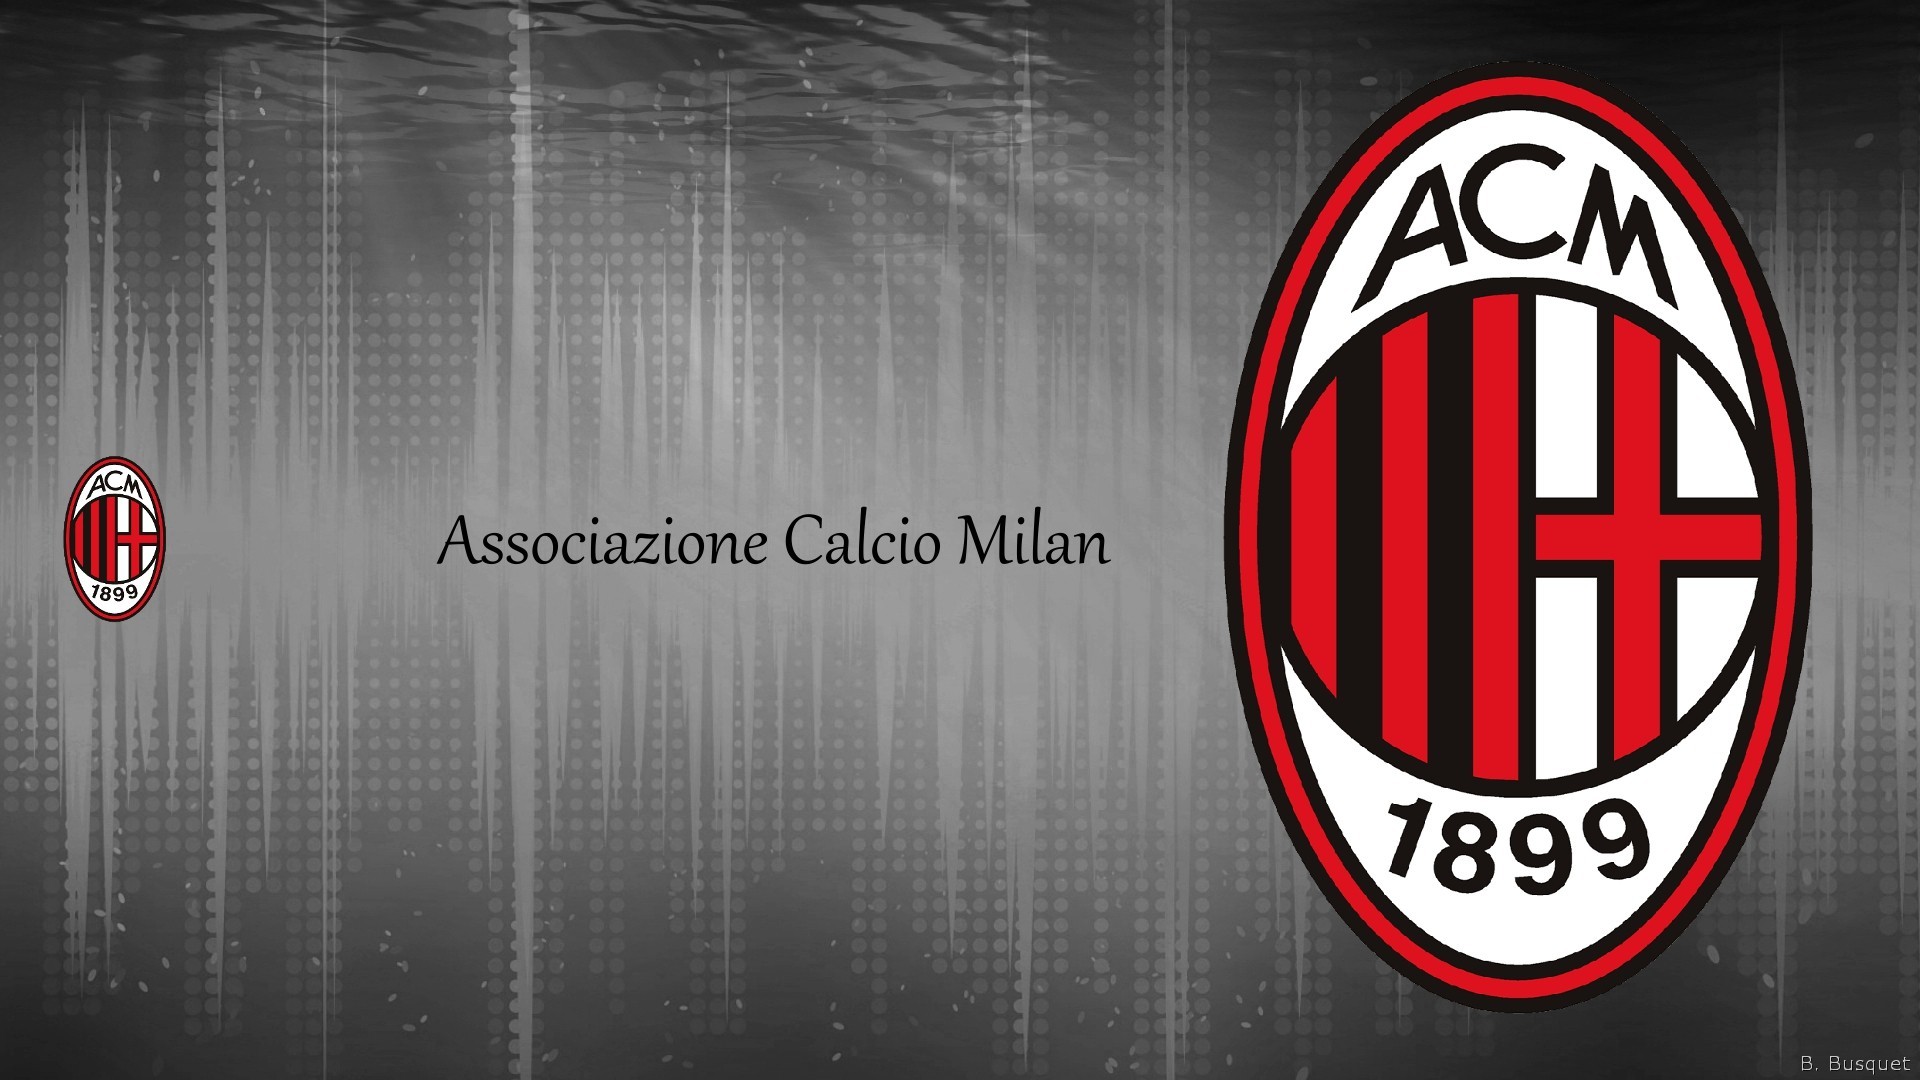 1920x1080 Gray abstract wallpaper of AC Milan. With big logo on the right, small logo  on the left and the text Associazione Calcio Milan in the center.